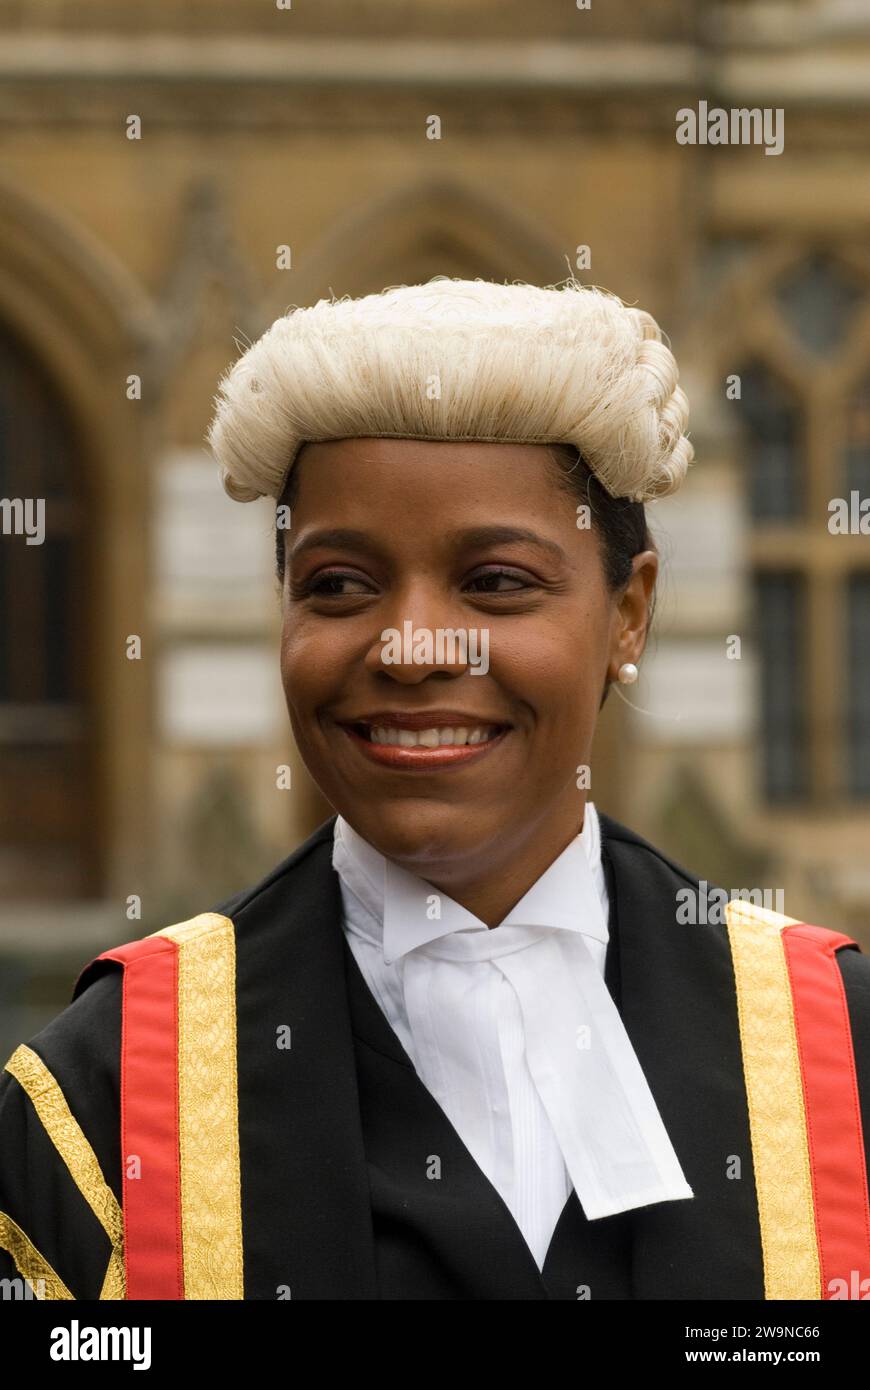 Judge Indira Demeritte-Francis, who sits at the Court of Appeal of the Commonwealth of the Bahamas attends the Lord Chancellors Breakfast London England UK. 2006 2000s HOMER SYKES Stock Photo